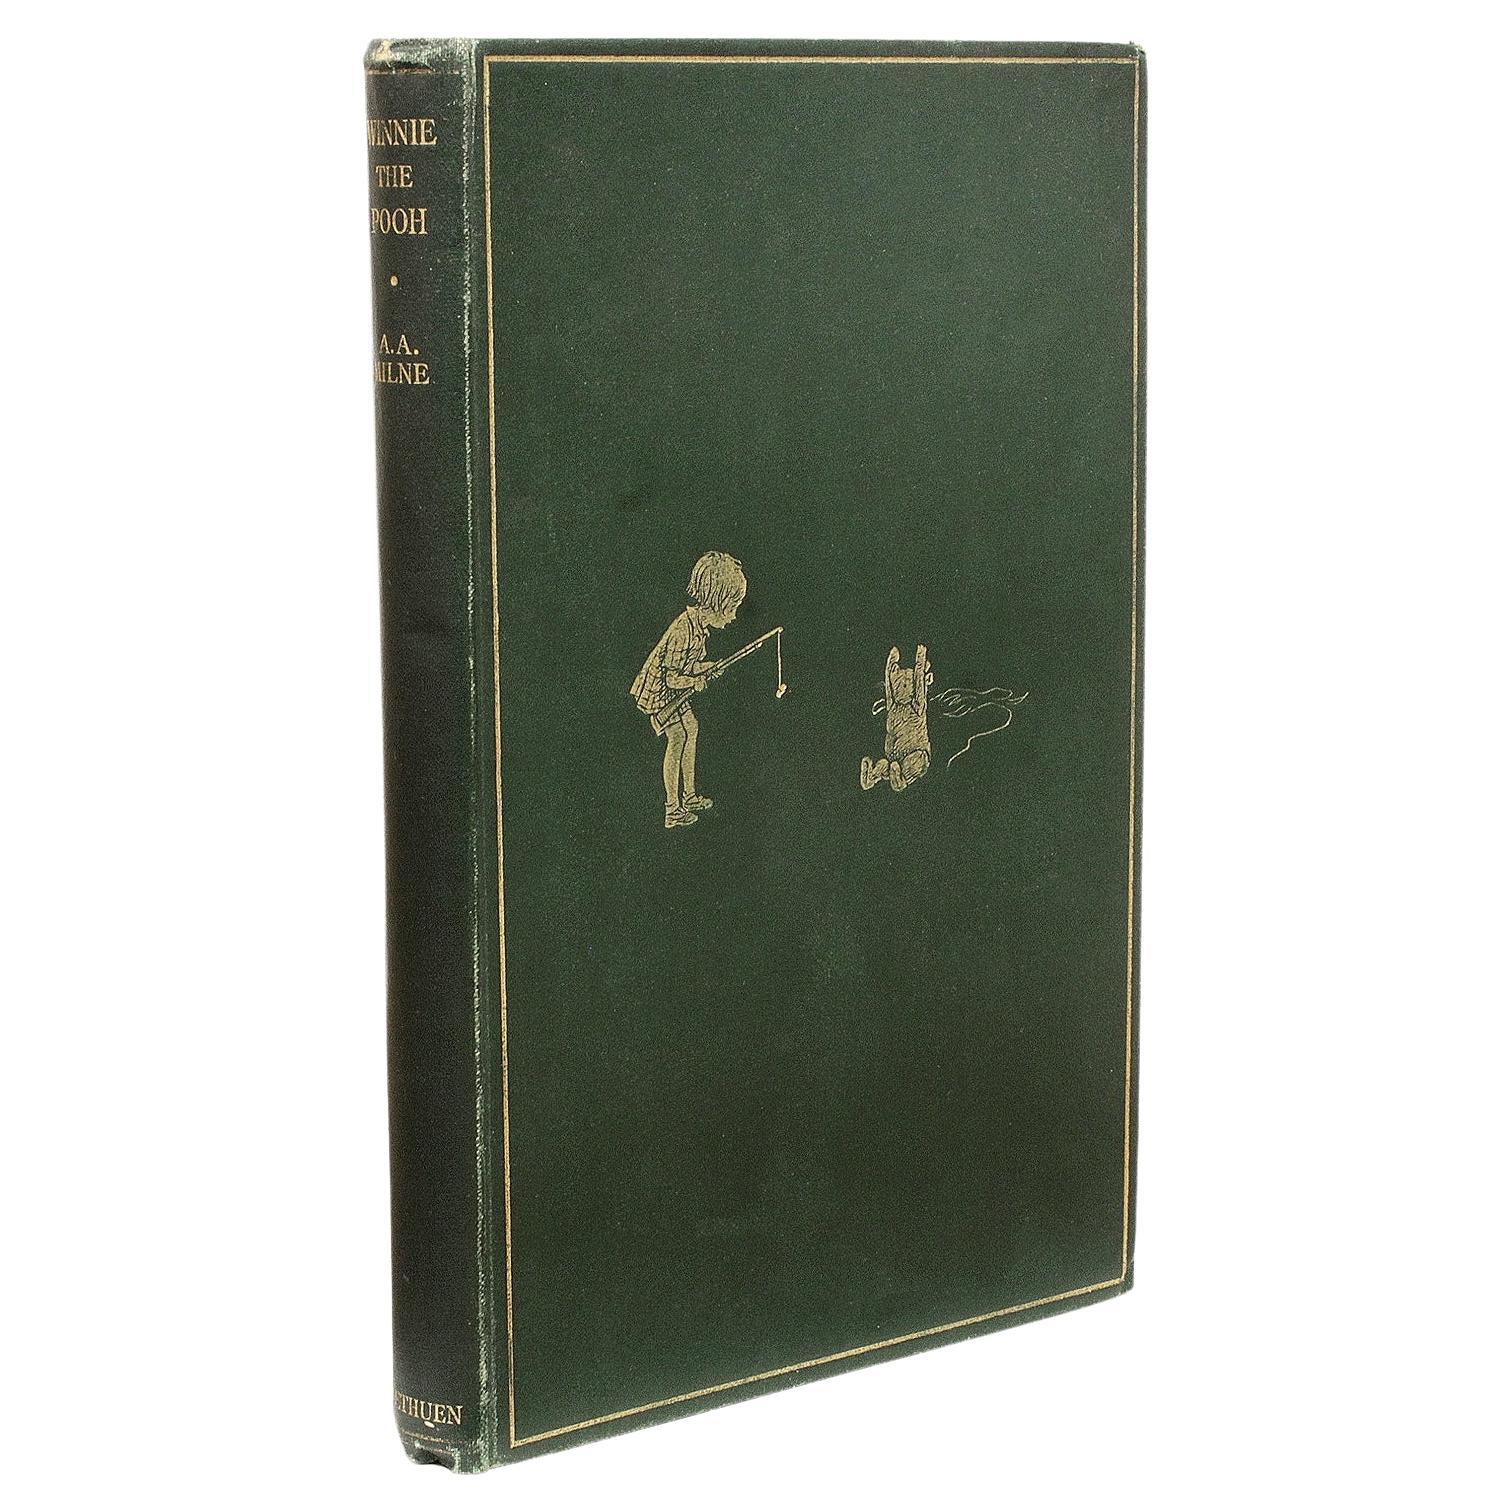 MILNE, A. A.. Winnie The Pooh. (1926 - FIRST EDITION - FIRST PRINTING)